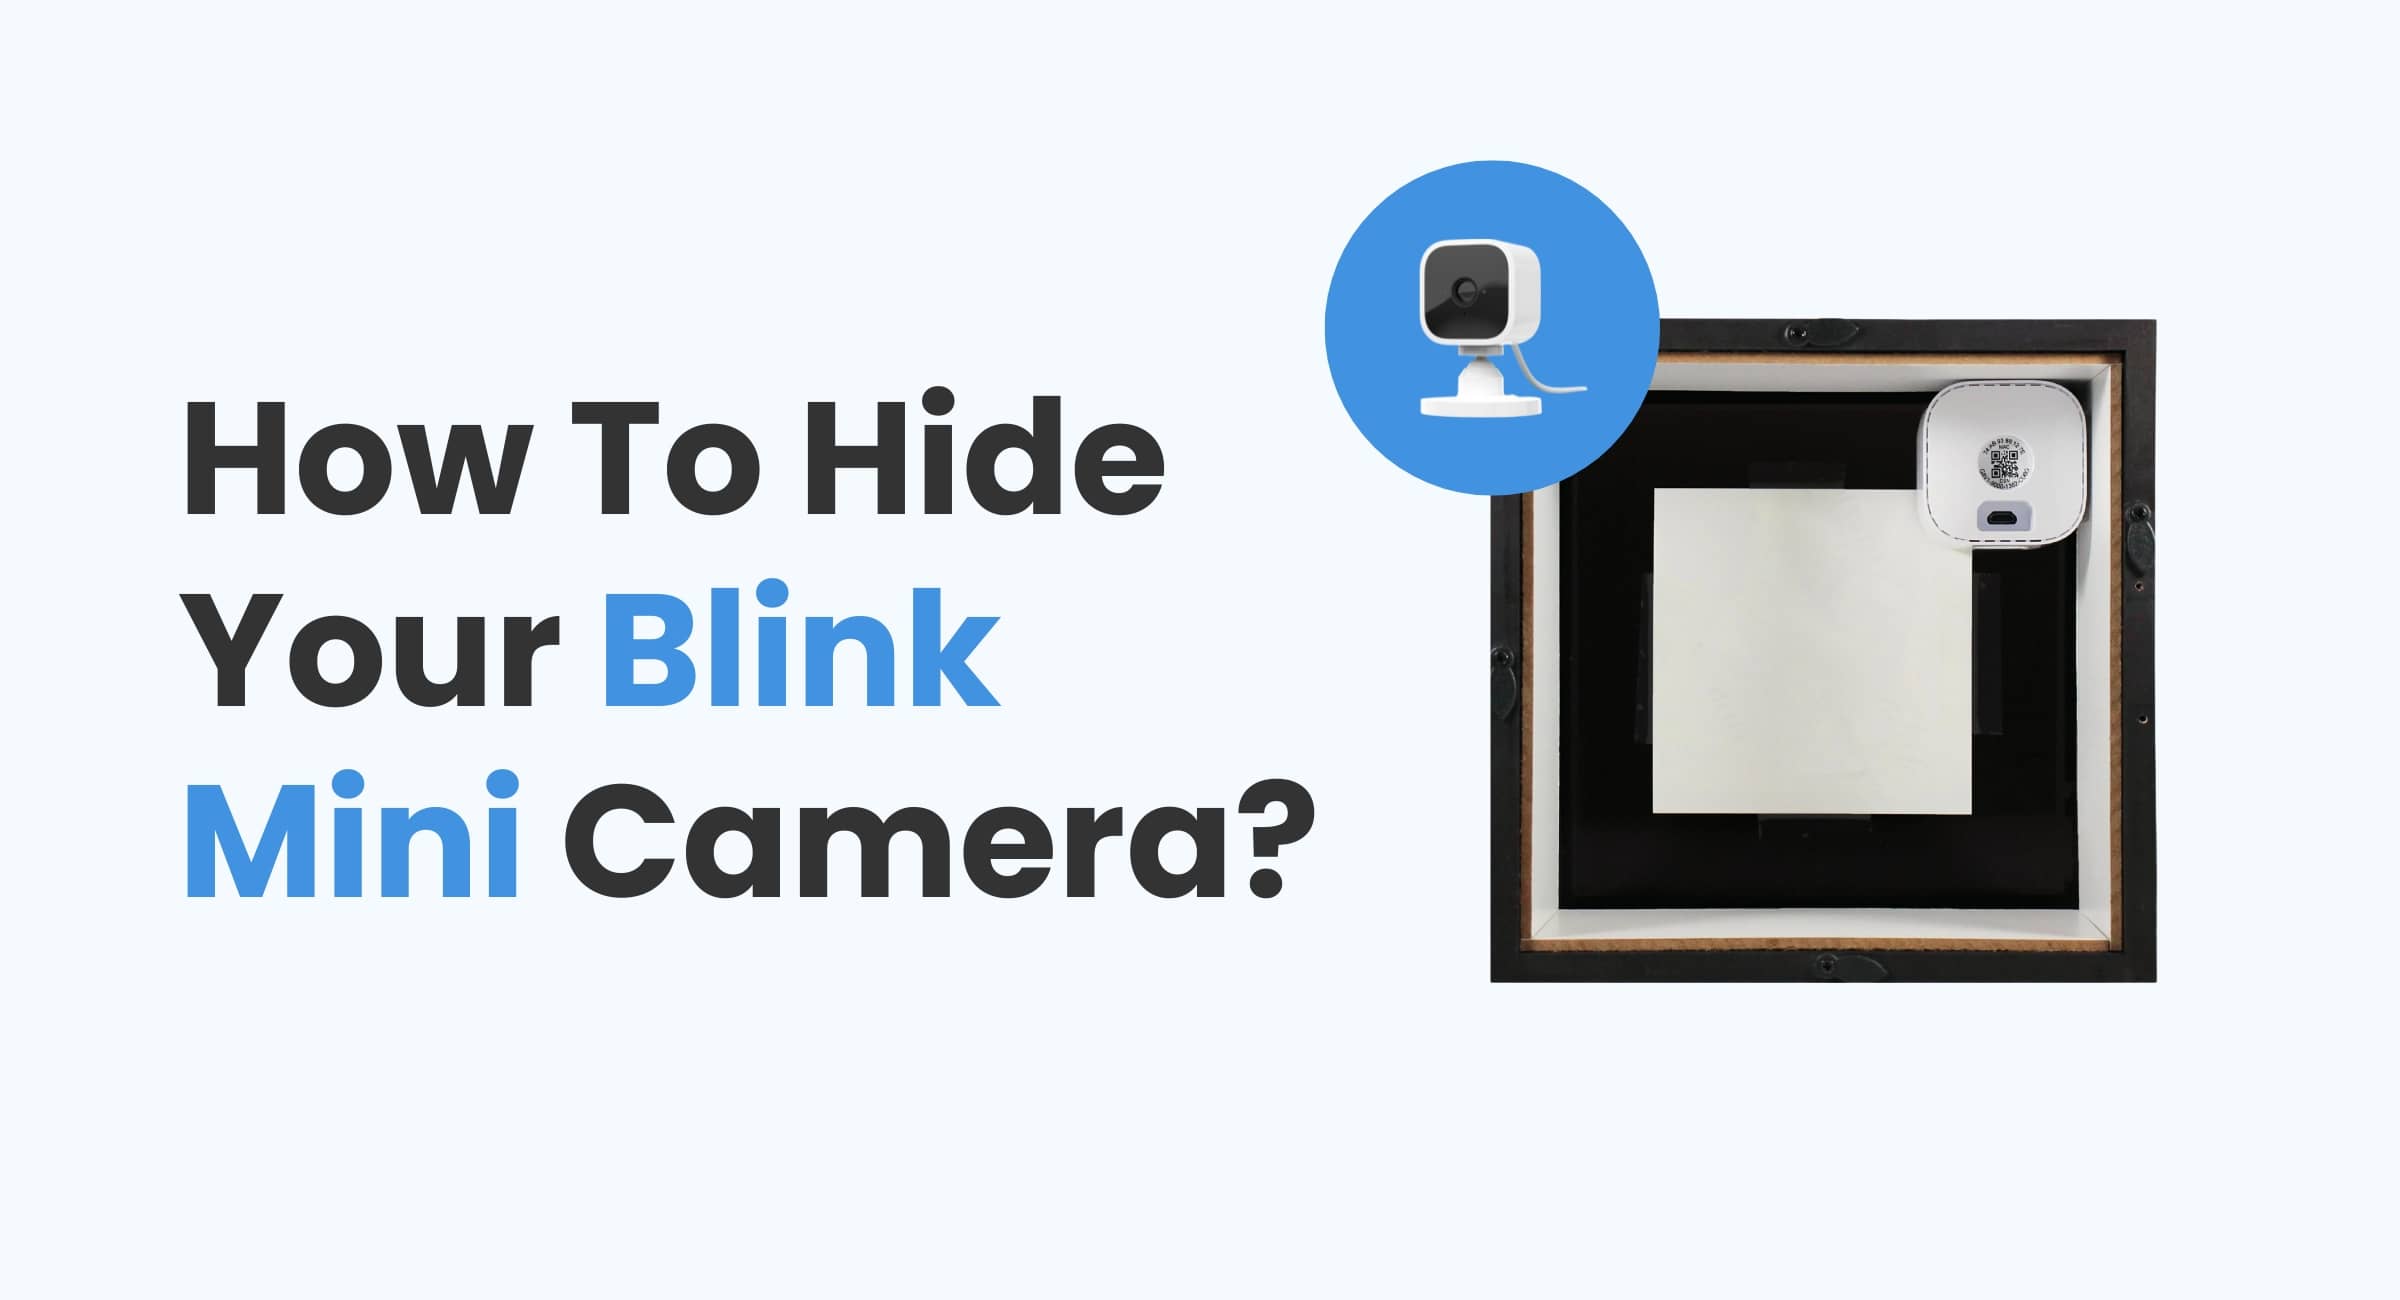 is offering two Blink Mini cameras for the price of one